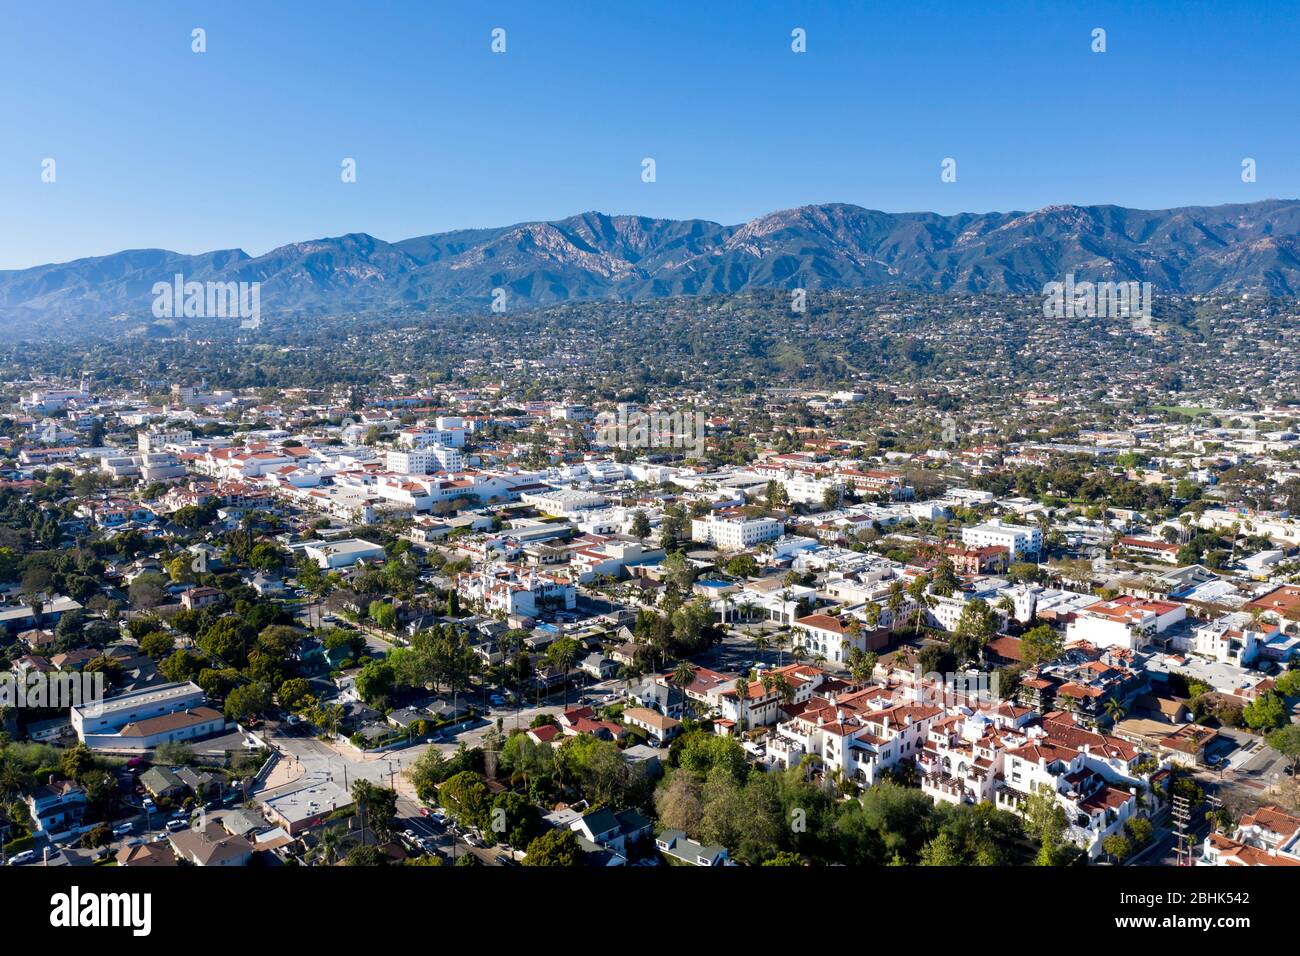 Aerial view above downtown in the city of Santa Barbara, California on a perfect clear day backed by scenic mountains Stock Photo